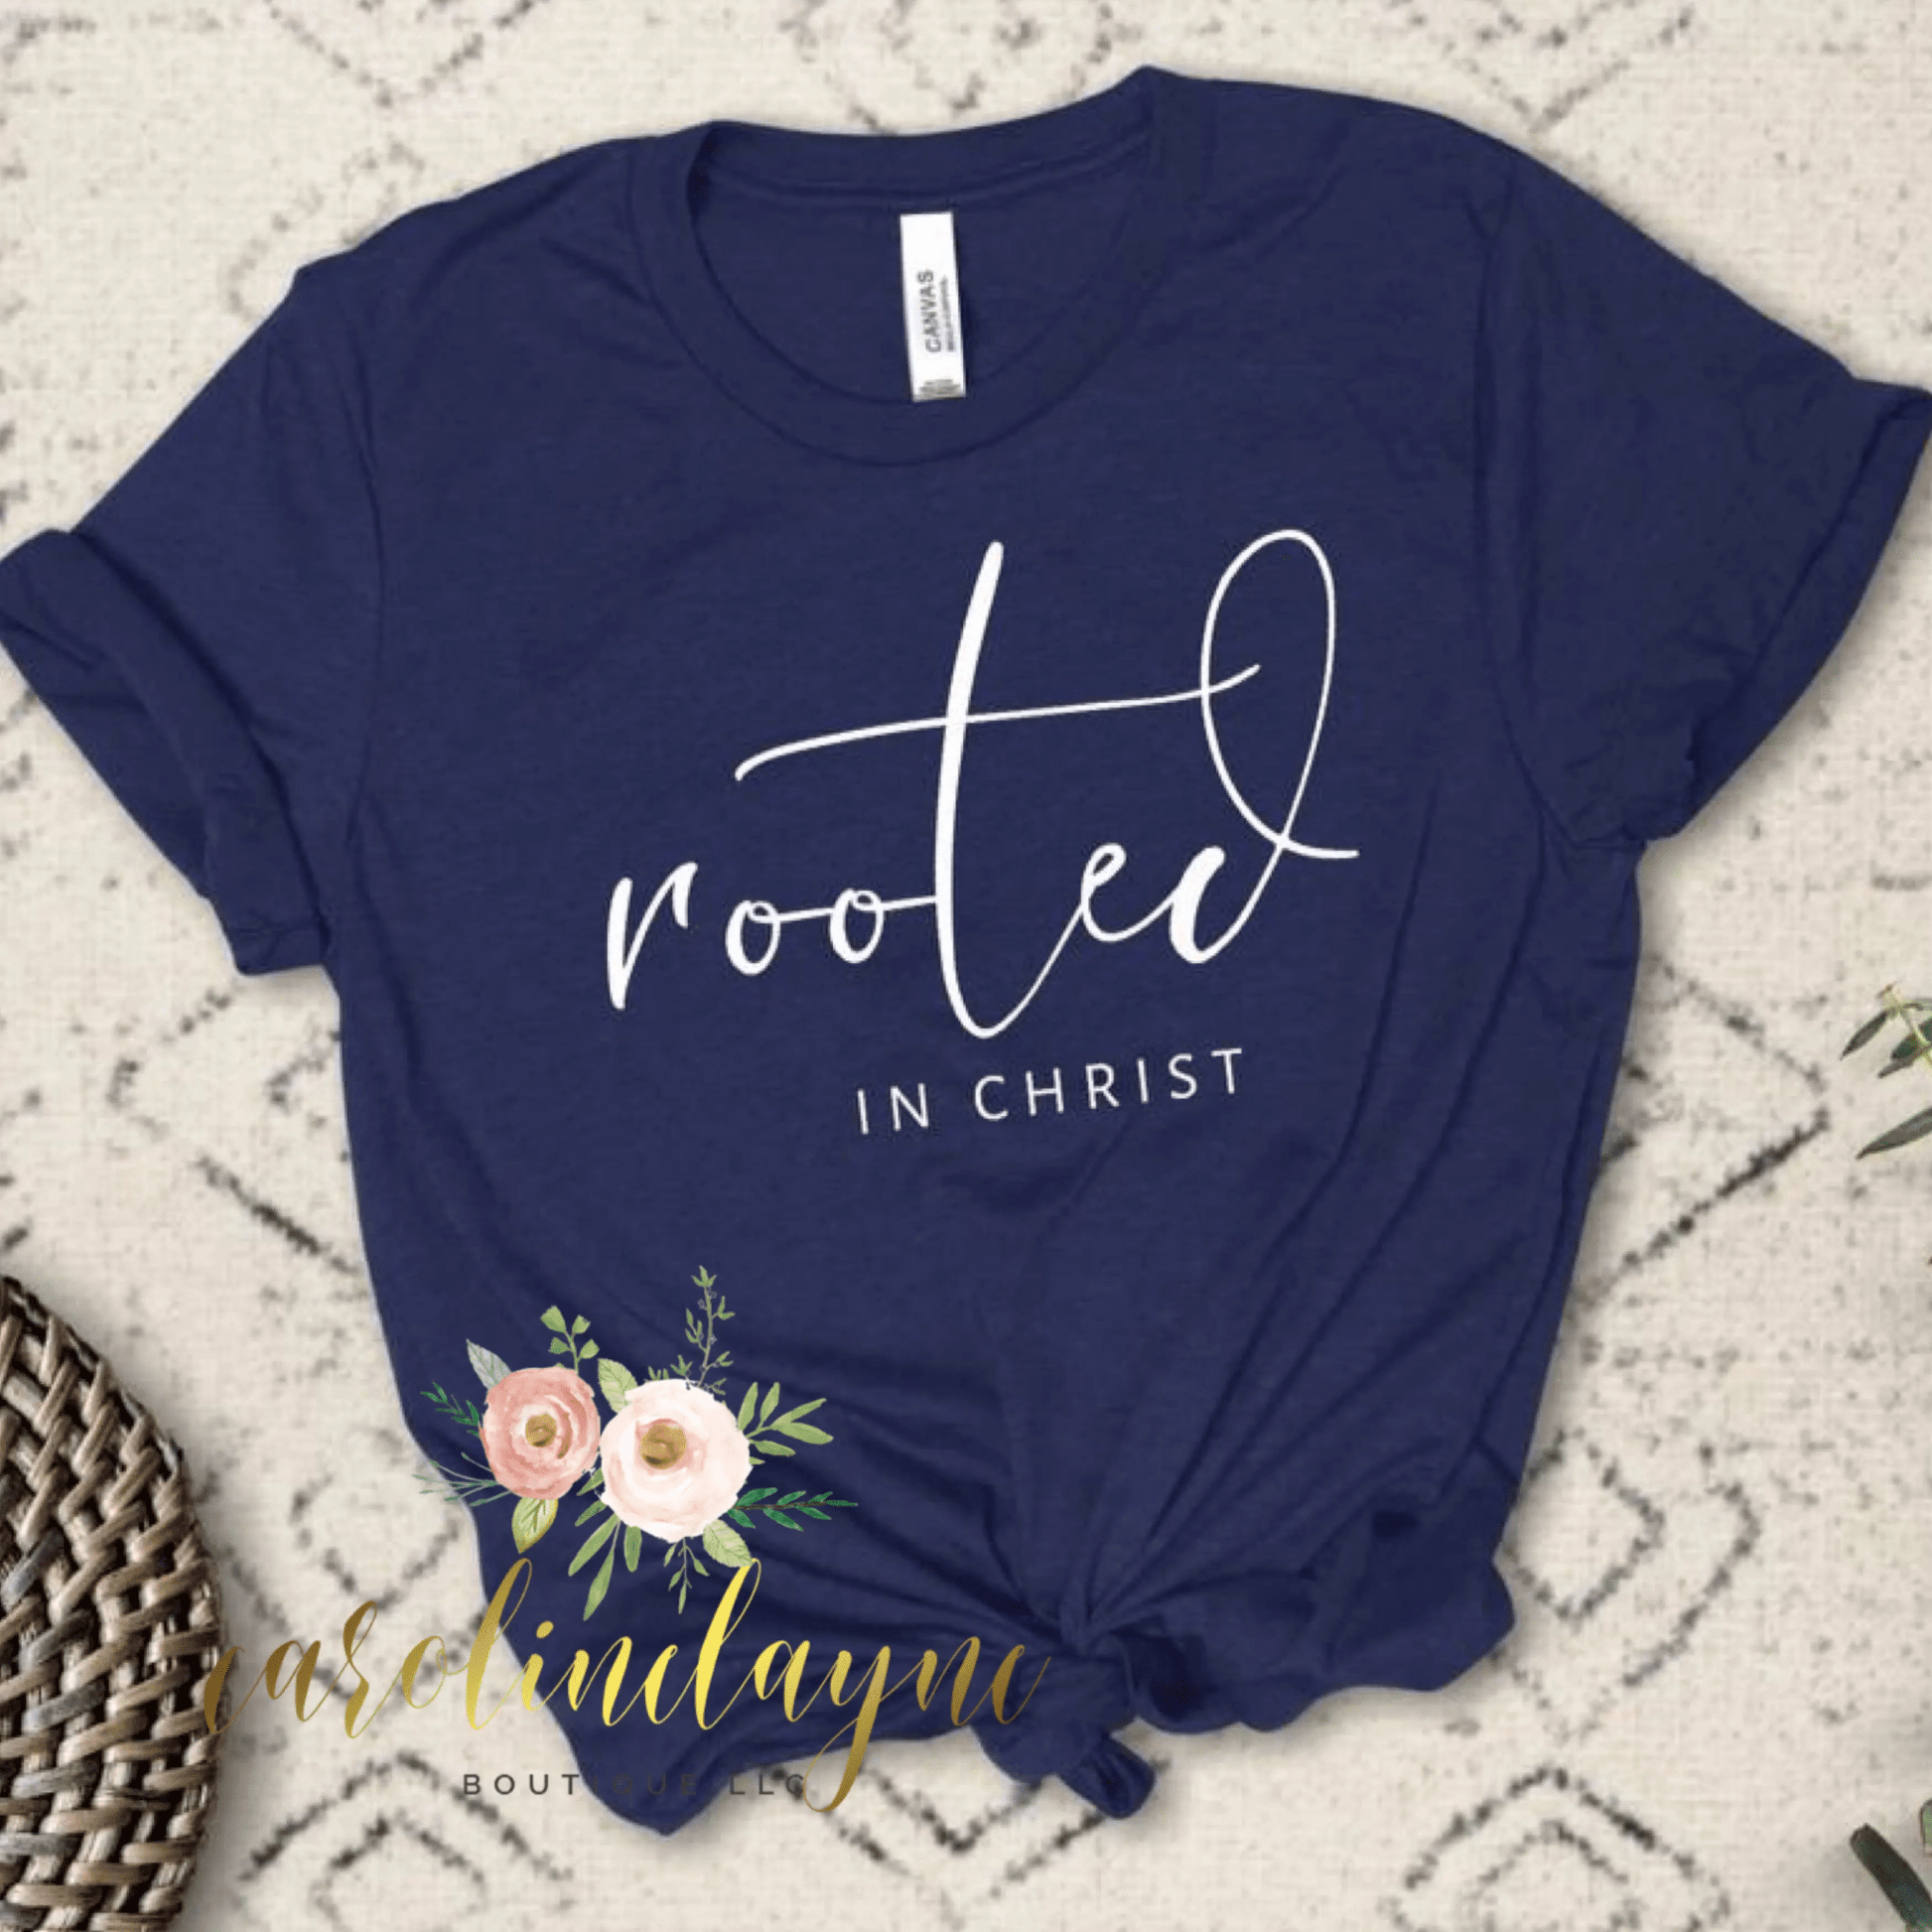 Rooted in Christ tee - Caroline Layne Boutique LLC